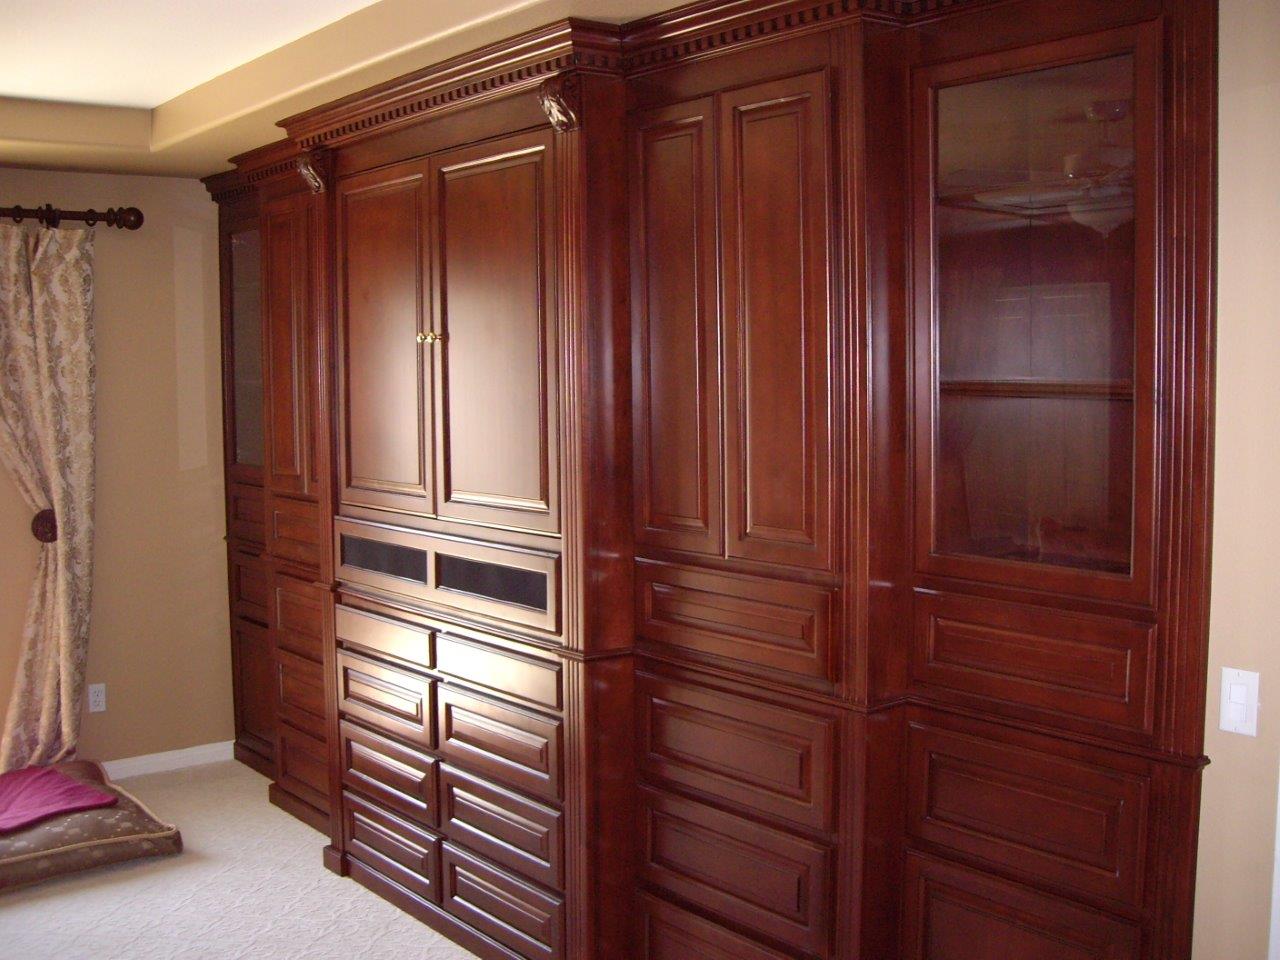 Murphy Beds and Bedroom Cabinets - Woodwork Creations